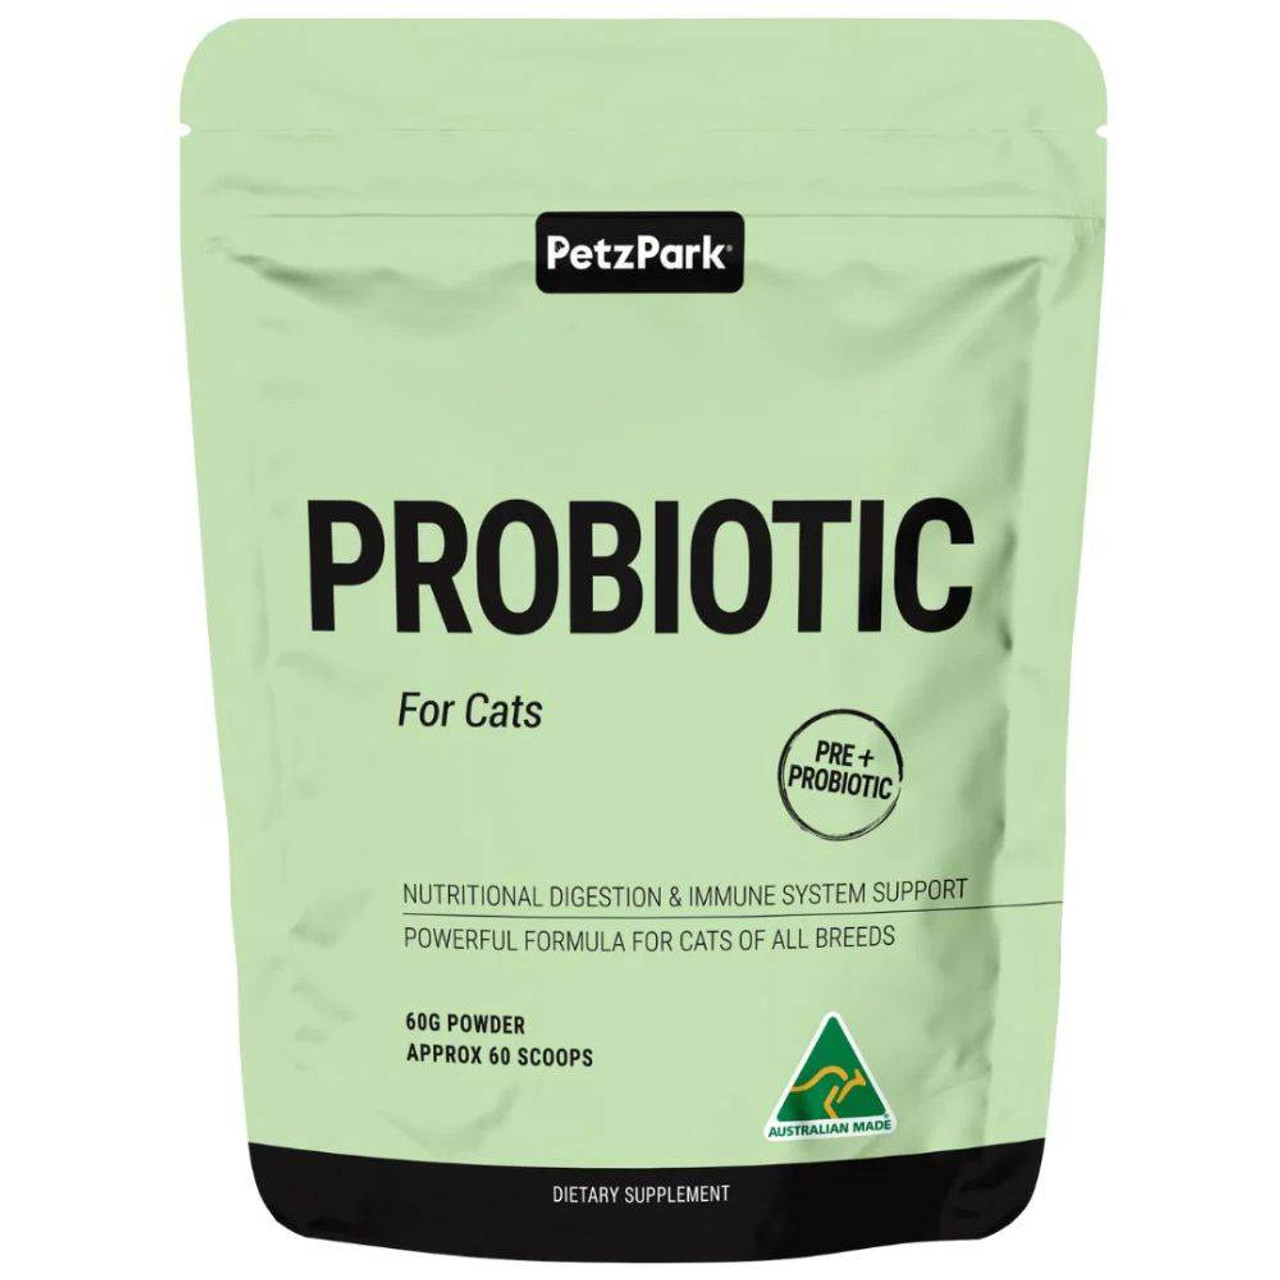 Petz Park Probiotic for Cats natural - No additional flavour added 60 Scoops